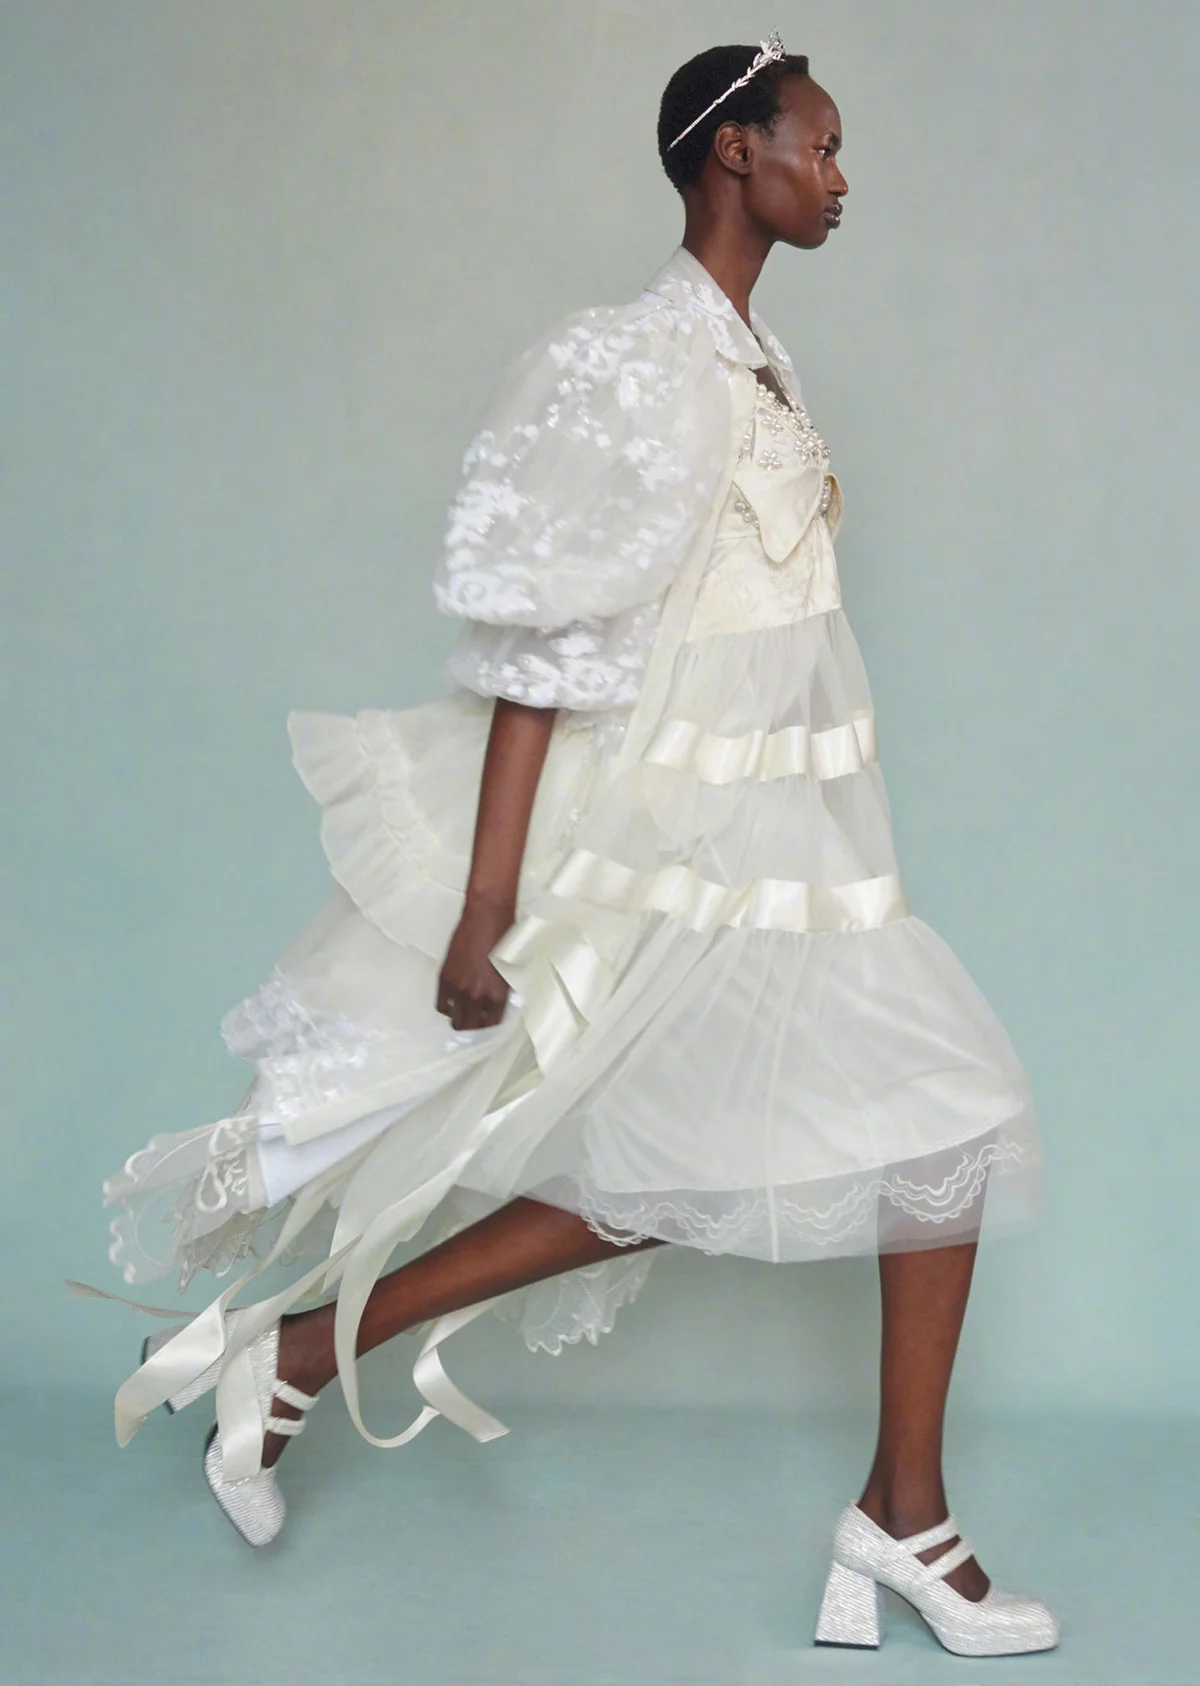 Nyarach Abouch Ayuel covers British Vogue Weddings May 2022 by Emma Tempest